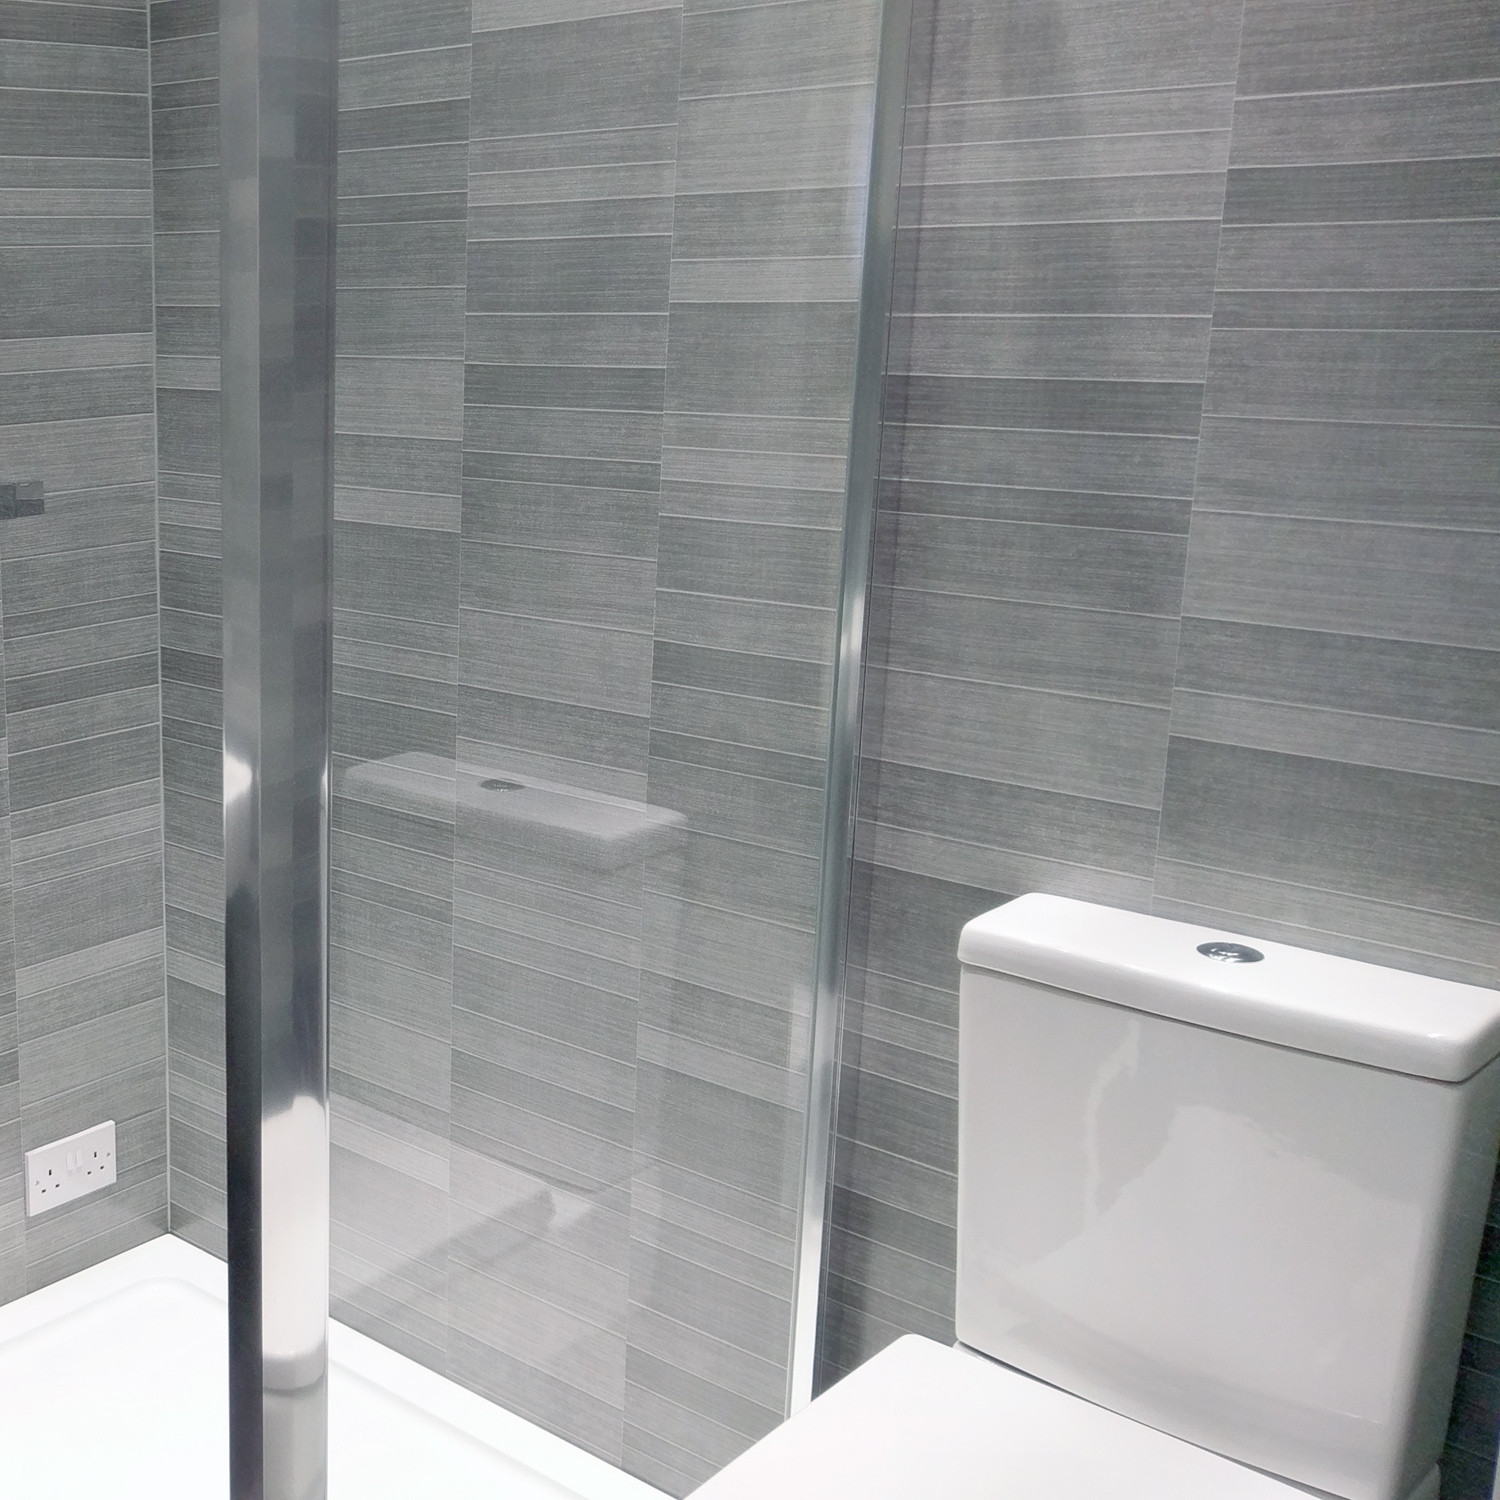 Tile Sheets For Bathroom Walls
 Modern Graphite Small Tile Wall Cladding Panels Cladding